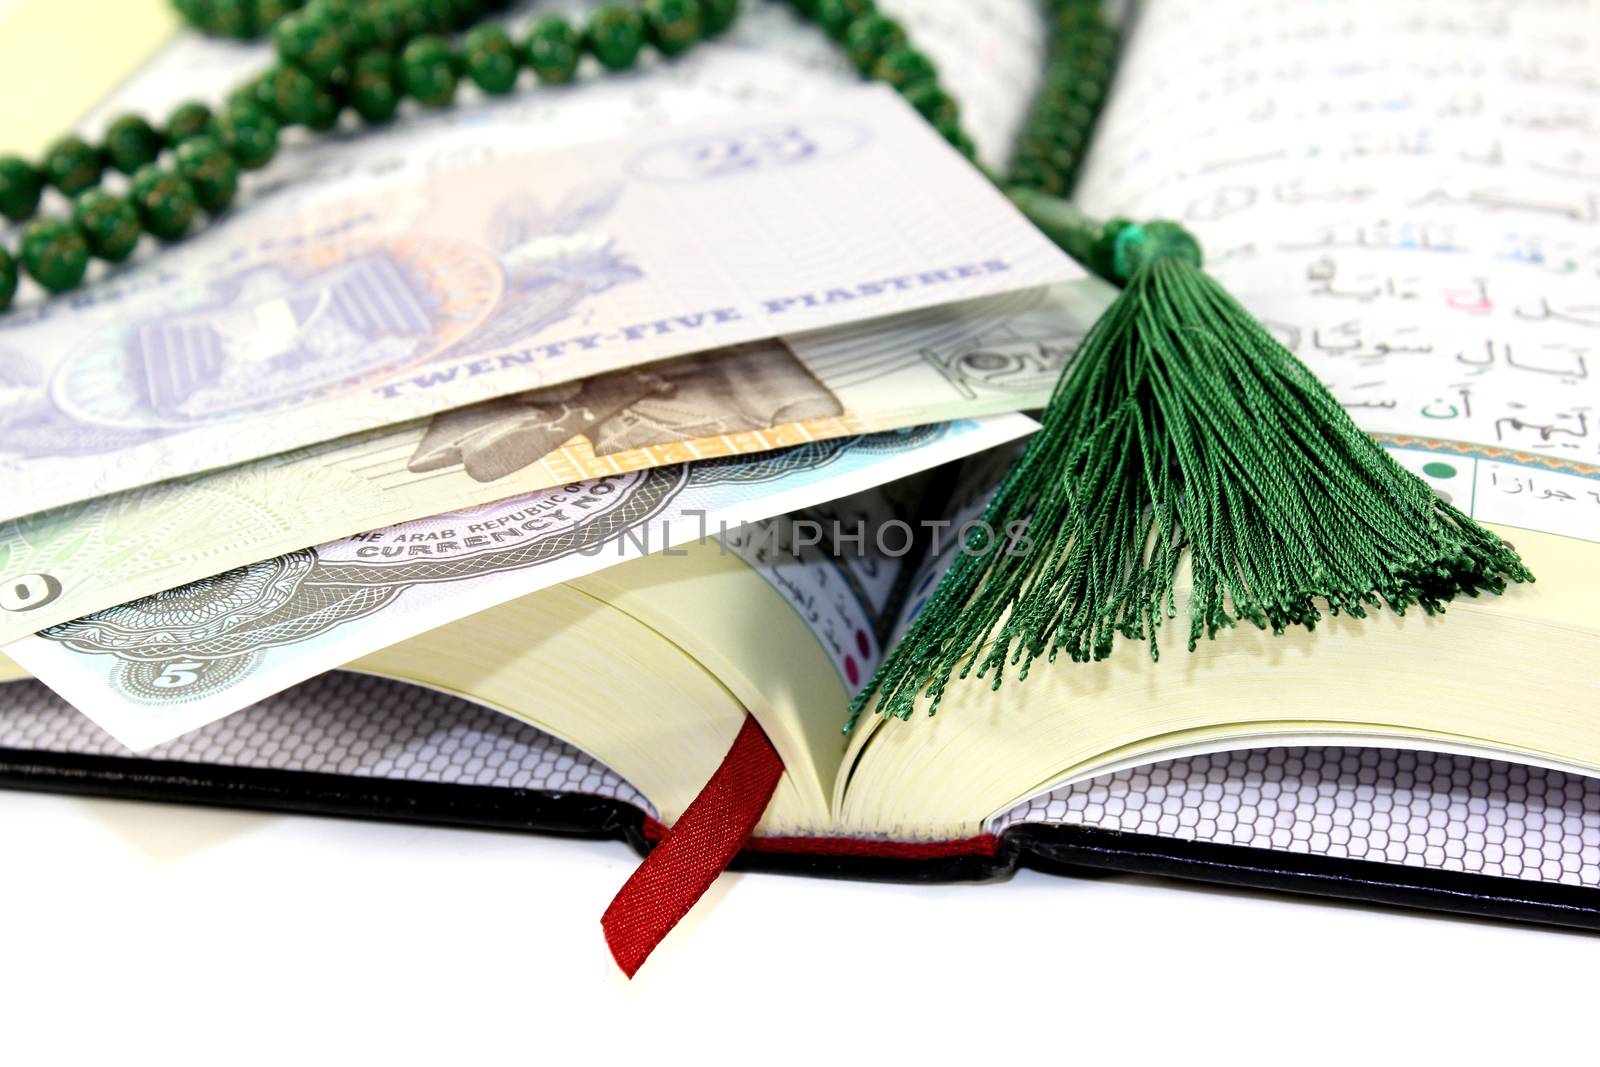 whipped Quran with Egyptian currency before light background